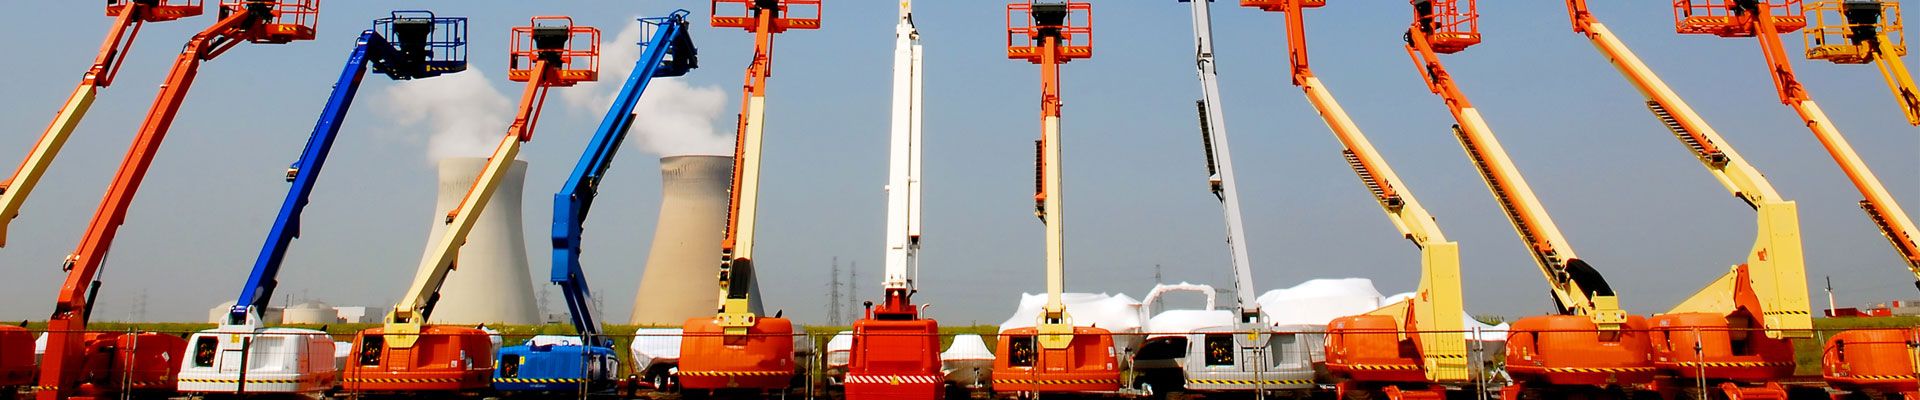 Mobile elevated work platform equipment lined up in a row